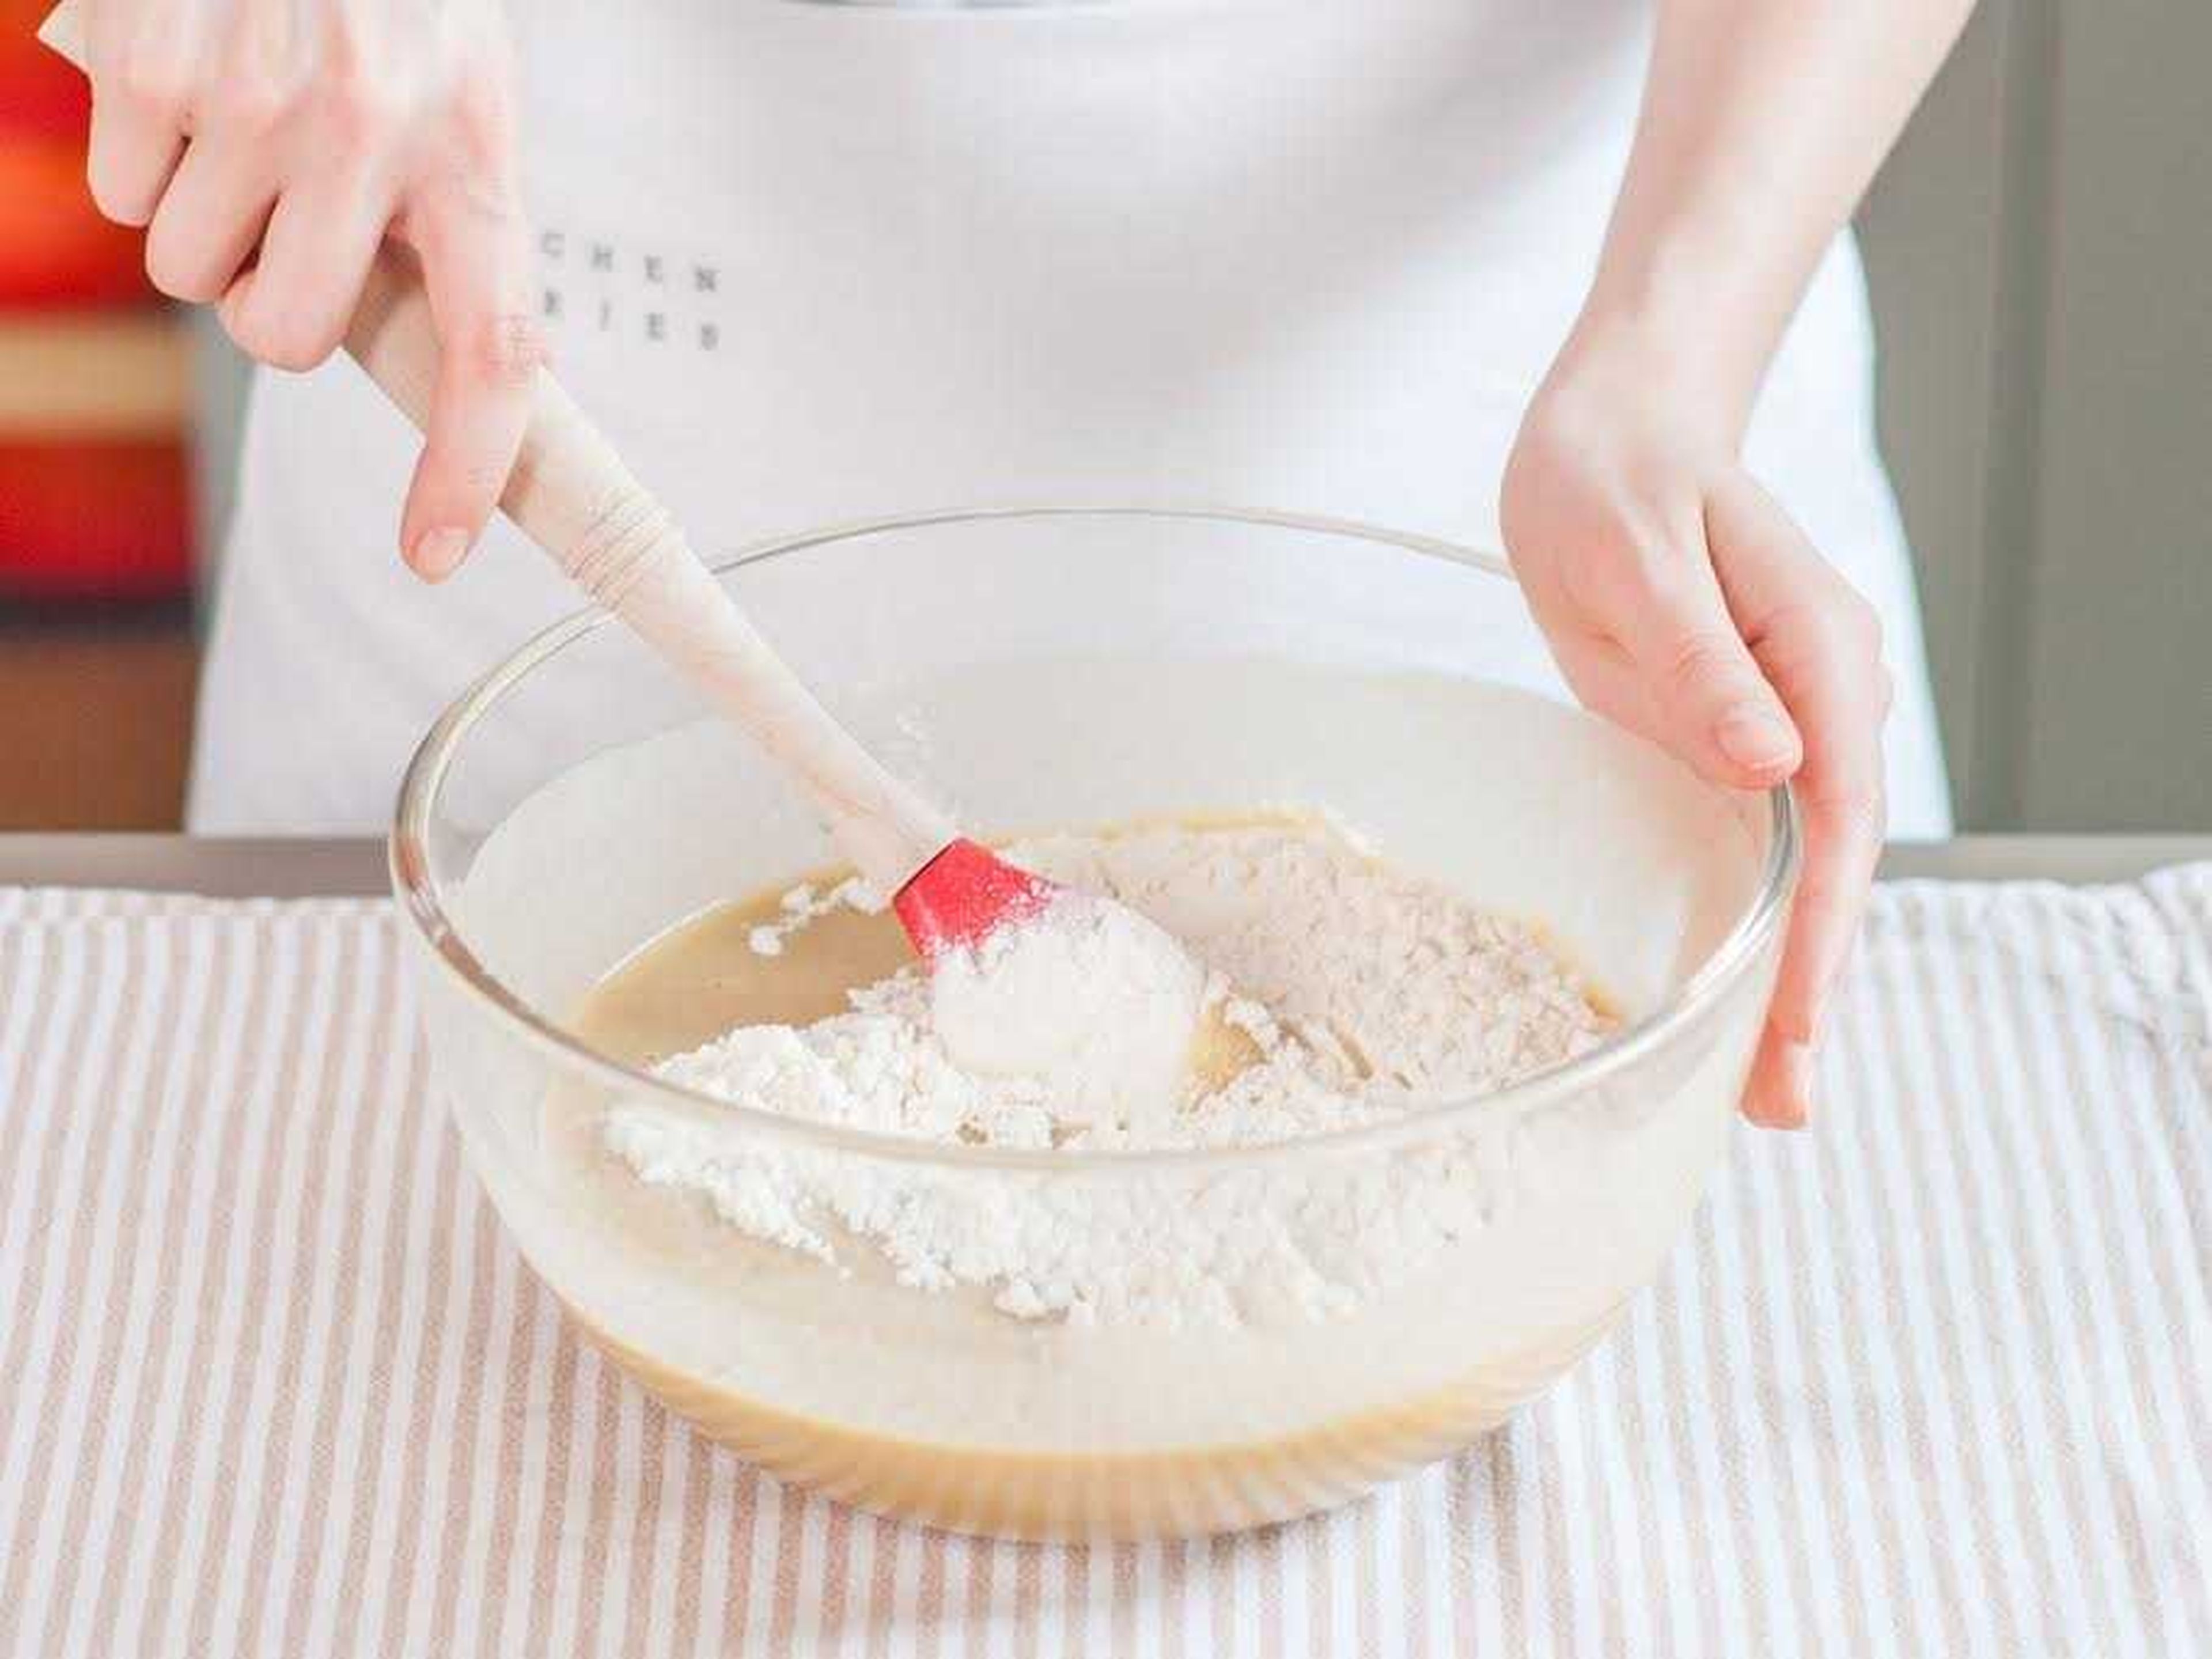 In a separate bowl, whisk together flour, baking powder, and remaining salt. Gently fold half of dry ingredients into wet ingredients. Add yogurt, then remaining dry ingredients.